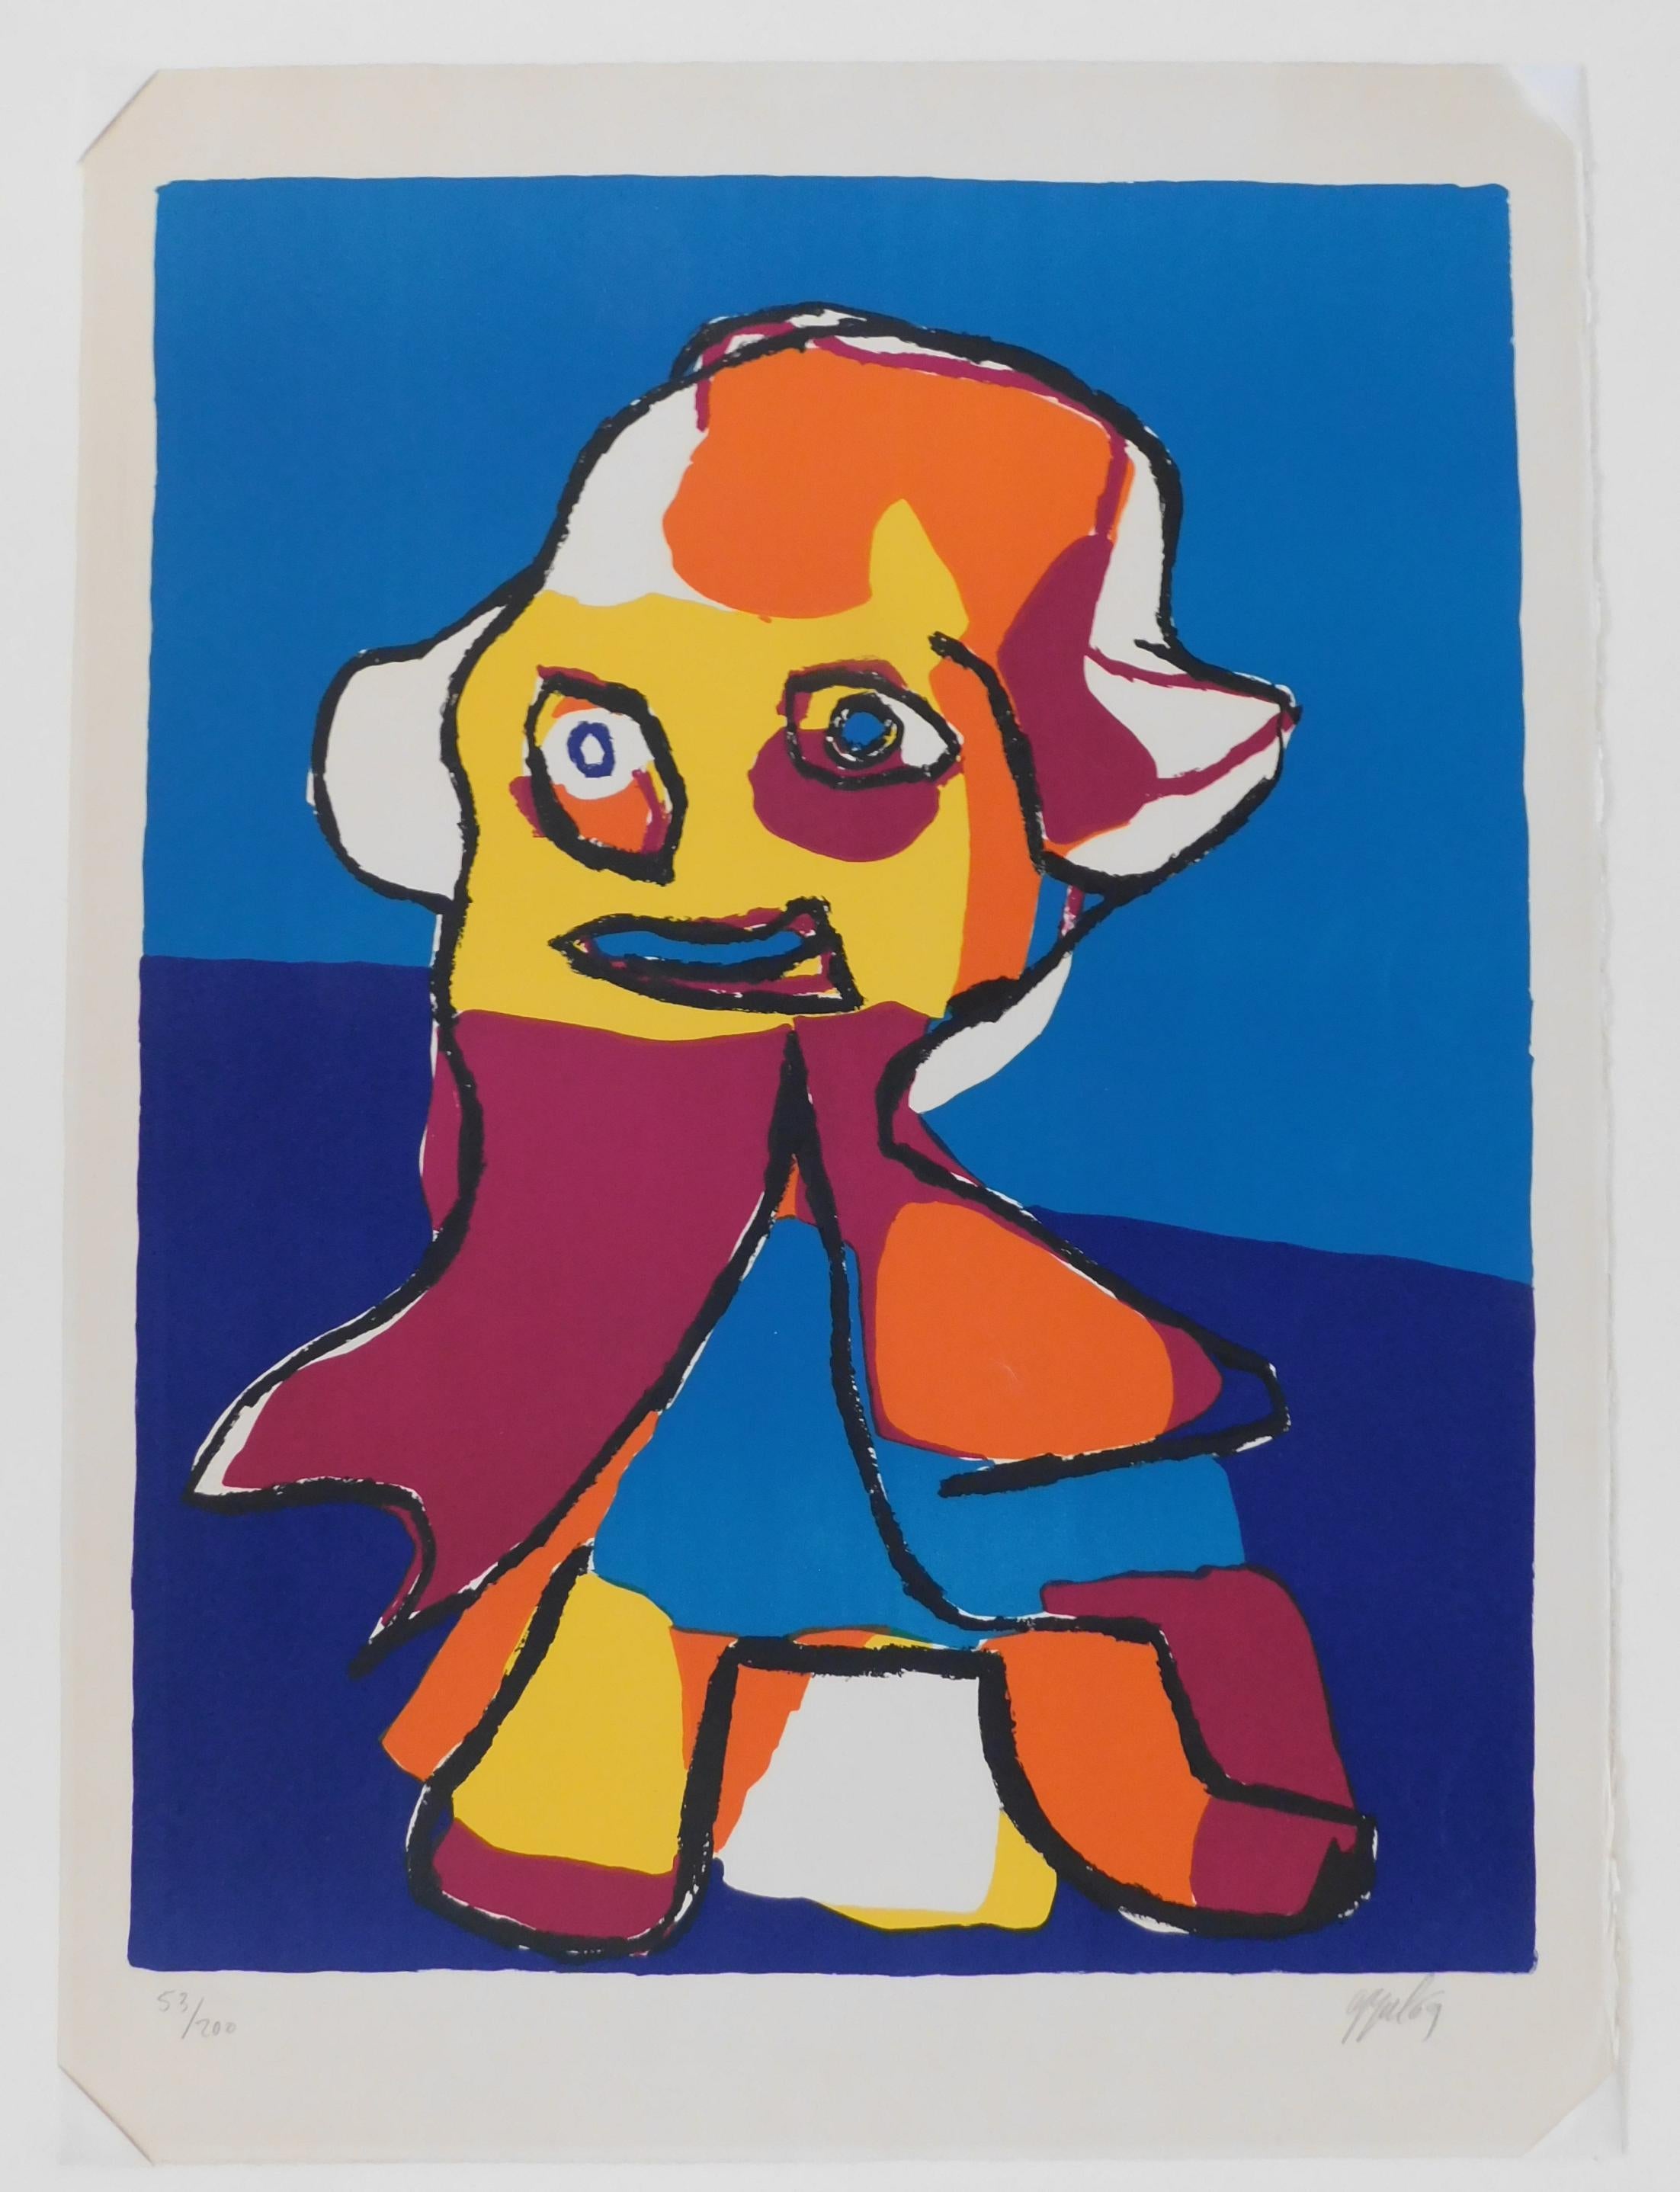 Original Abstract Color lithograph by Dutch artist Karel Appel (1921-2006).
Created 1969. Edition size is 53 of 200. The work is signed in pencil lower right.
The image size is: 25 5/8 x 19 3/4. The sheet size is: 30 x 22.
The print is in